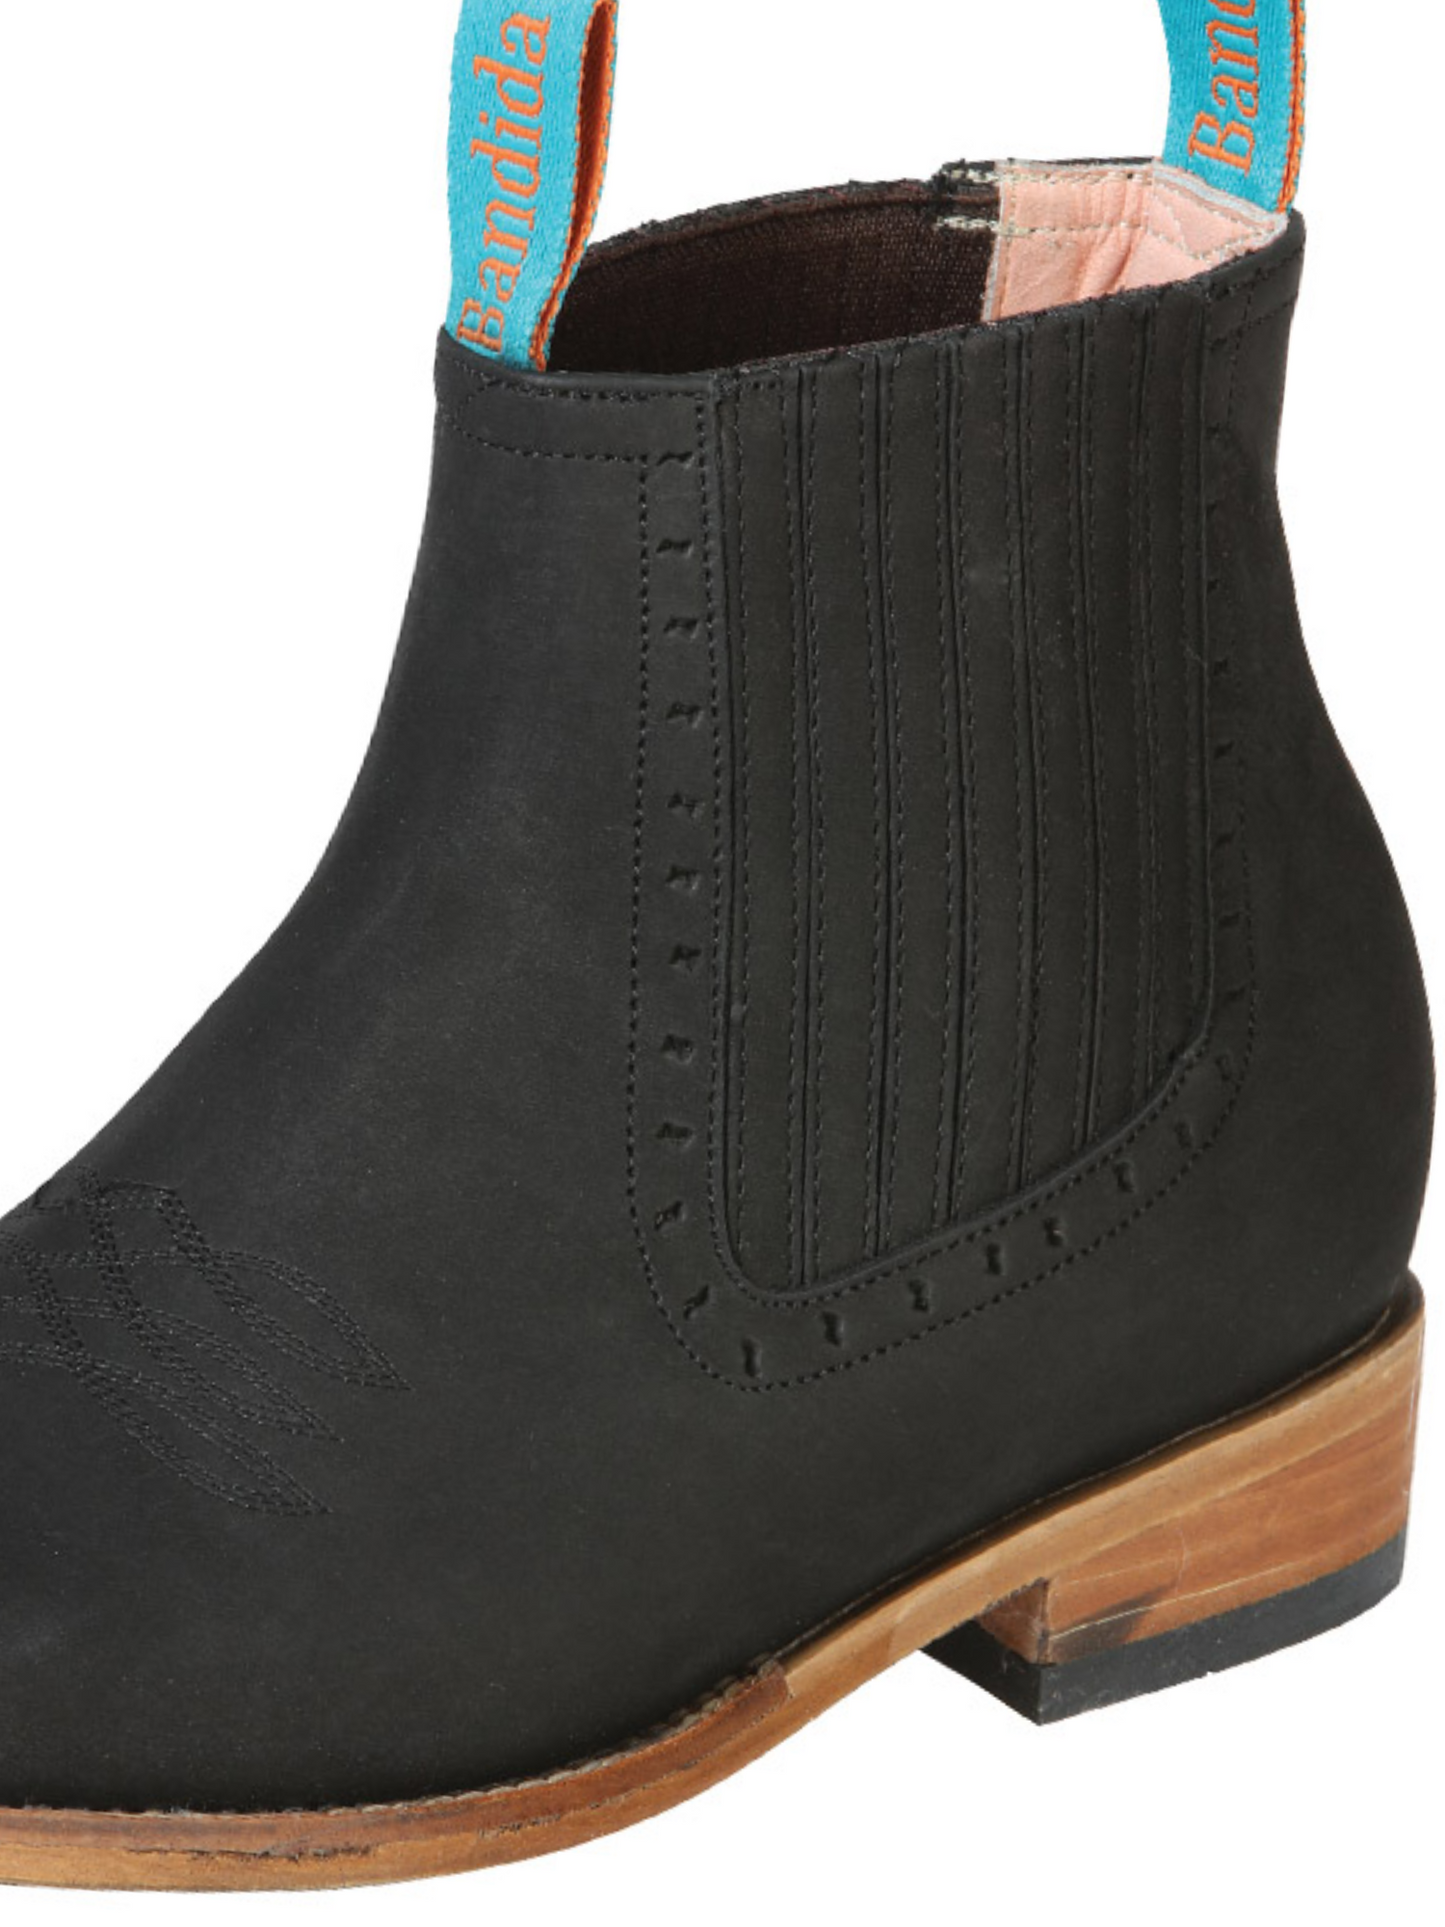 Classic Nubuck Leather Rodeo Cowboy Ankle Boots for Women 'La Barca' - ID: 126663 Western Ankle Boots La Barca